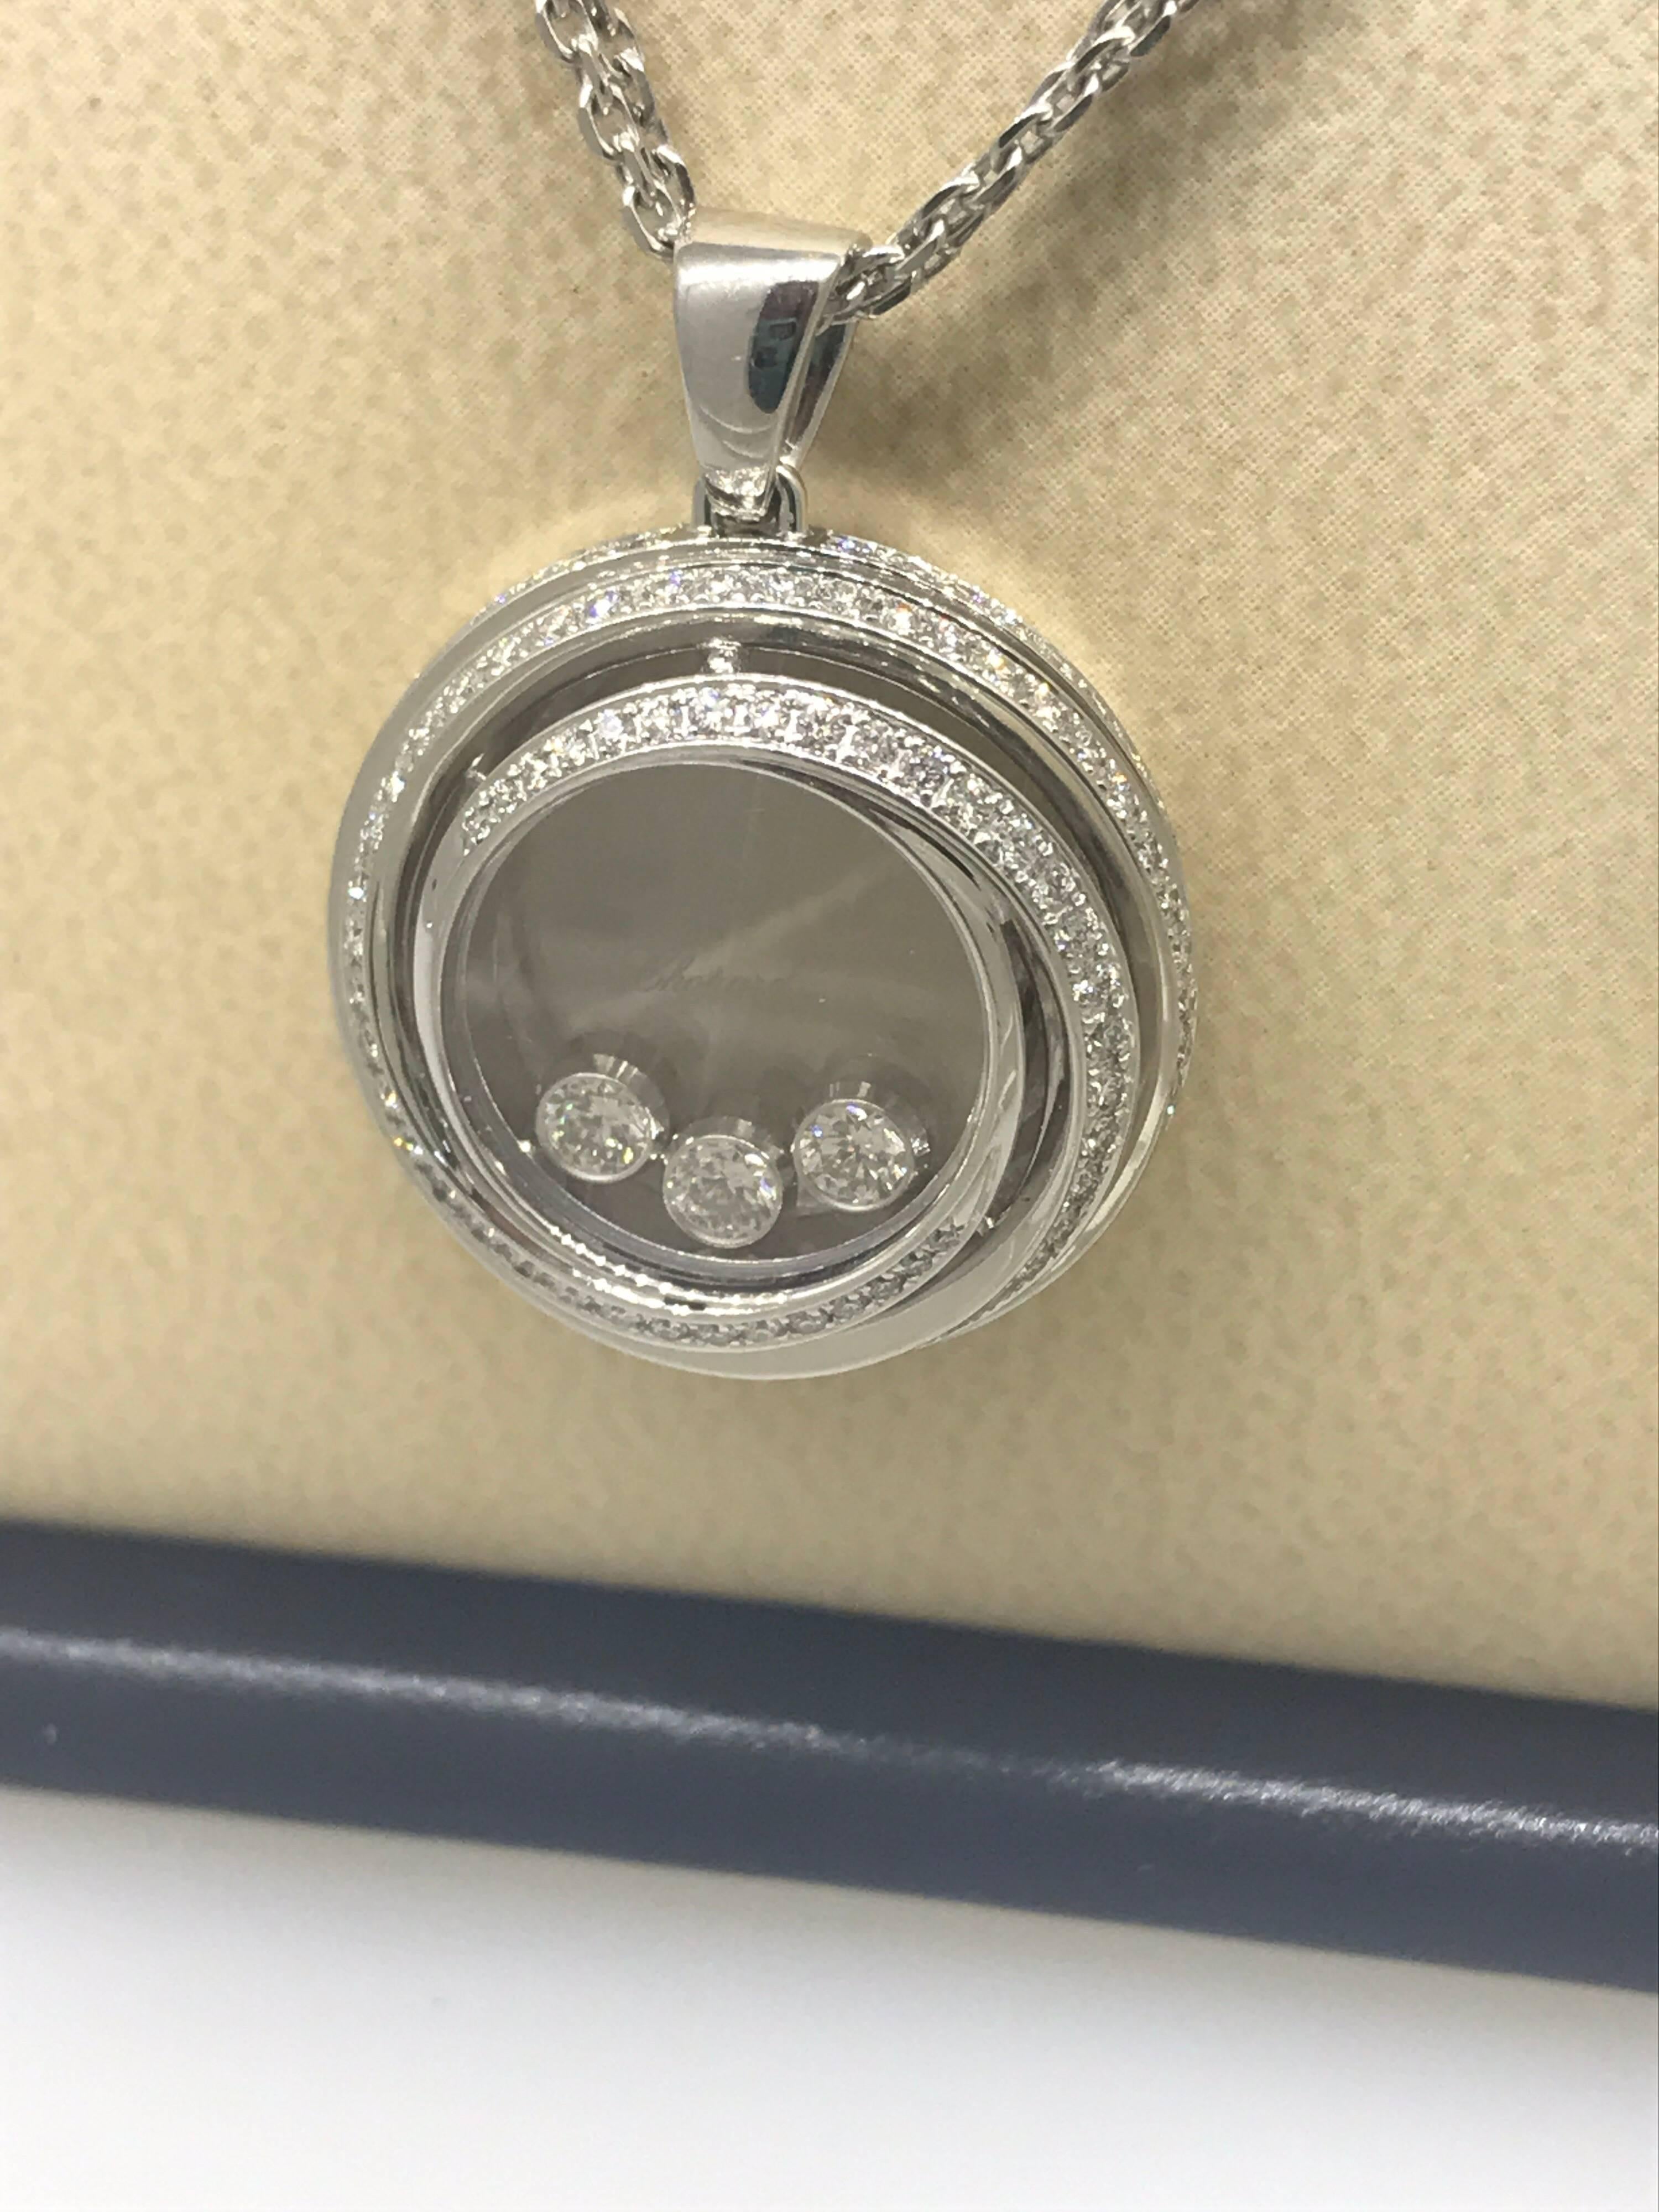 Chopard Happy Emotions Pendant / Necklace

 

Model Number: 79/9217-1003

 

100% Authentic

 

Brand New

 

Comes with original Chopard box, certificate of authenticity and warranty, and jewels manual



18 Karat White Gold (16.19gr)



135